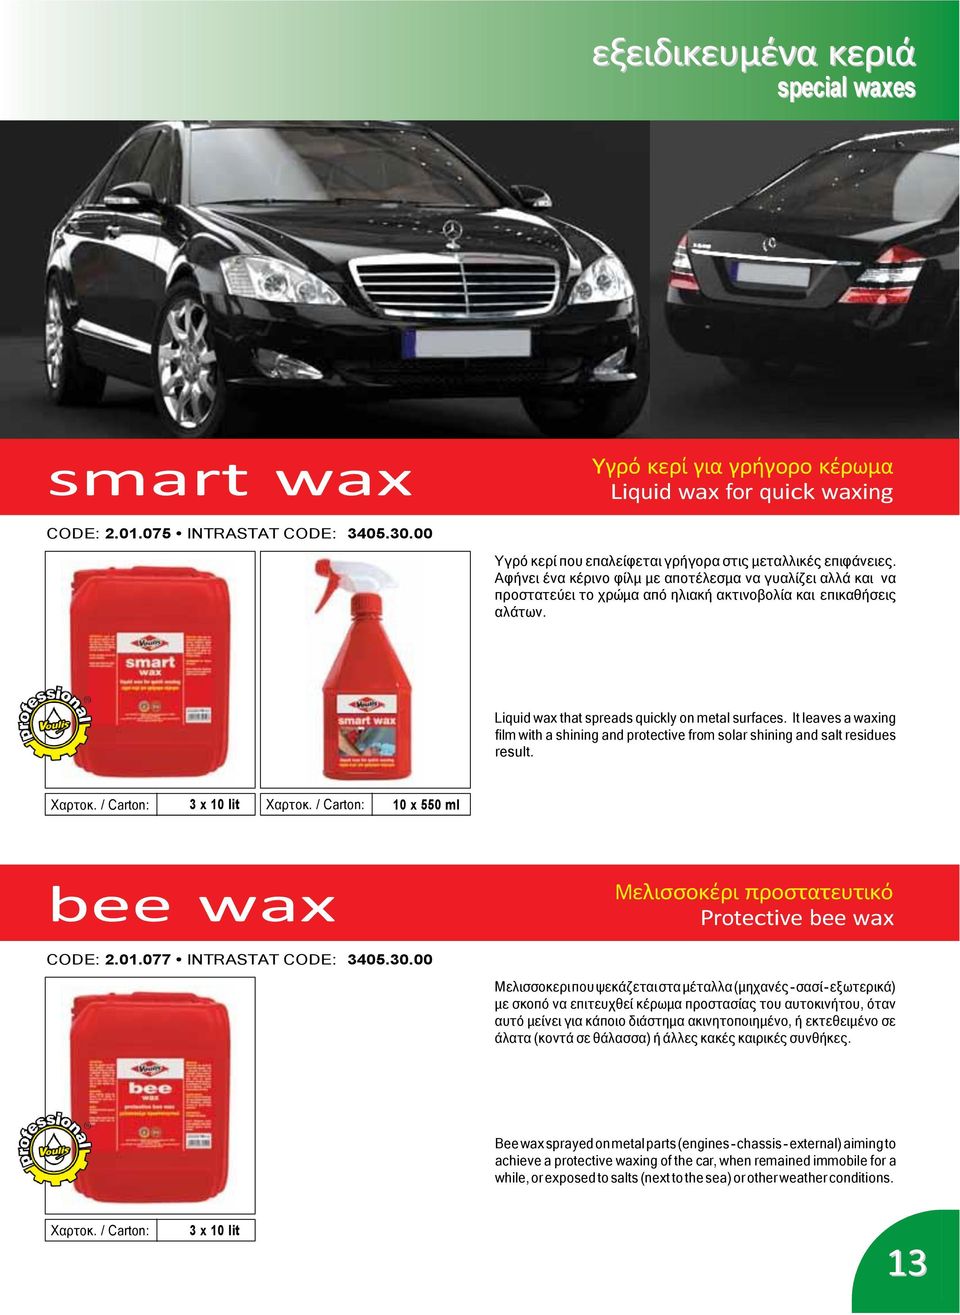 Liquid wax that spreads quickly on metal surfaces. It leaves a waxing film with a shining and protective from solar shining and salt residues result.